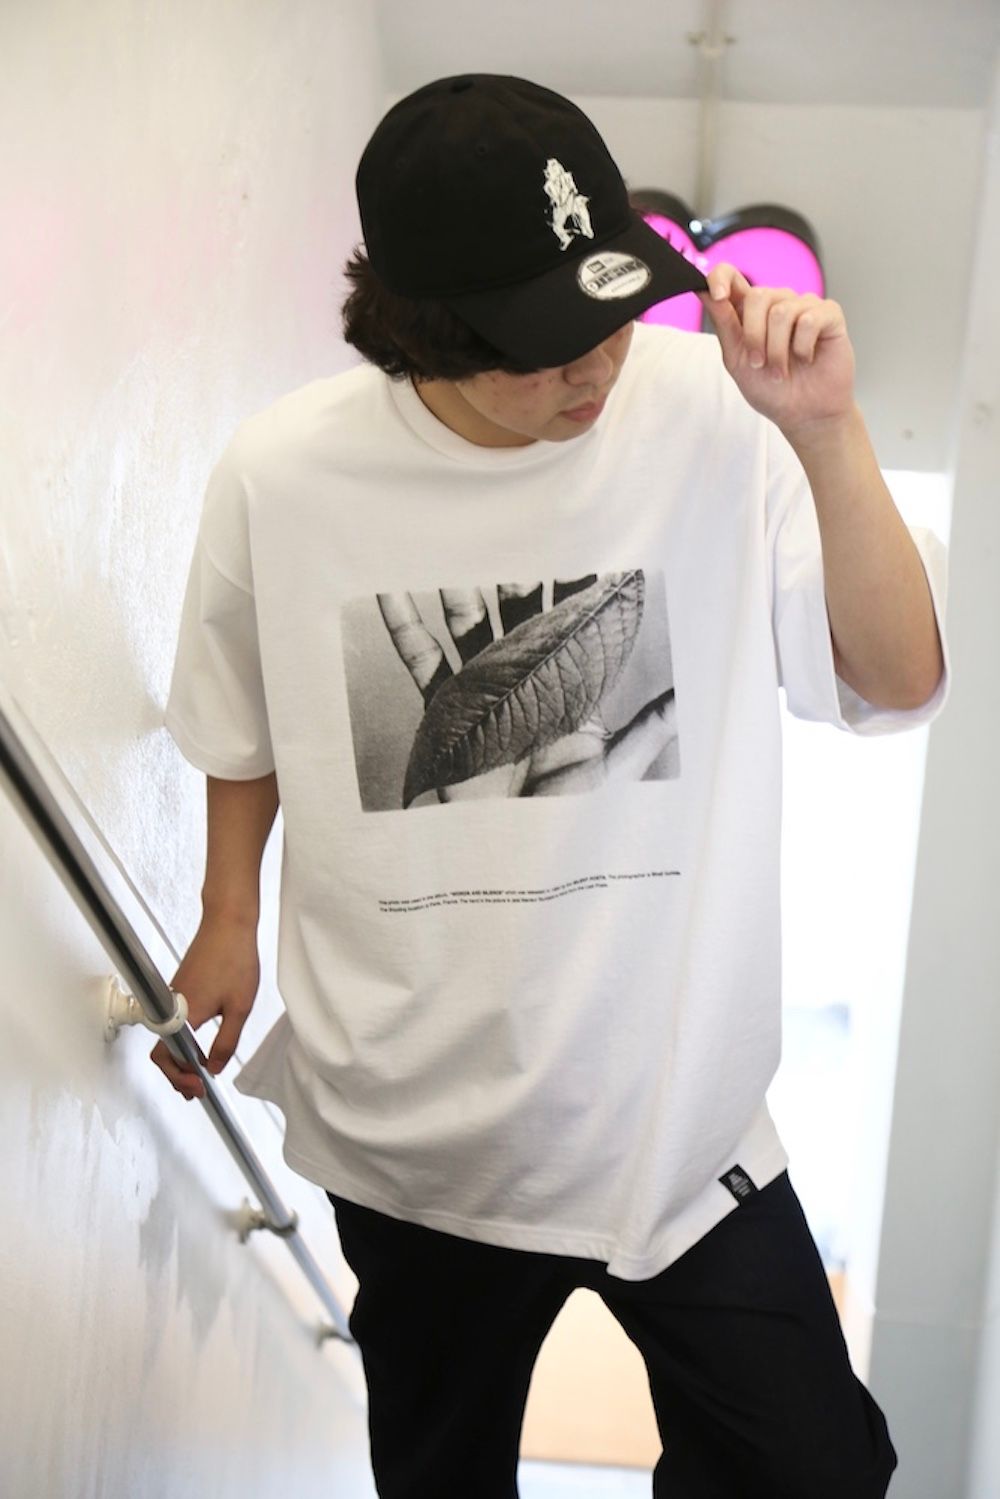 GraphpaperGraphpaper POET MEETS DUBWISE Tシャツ